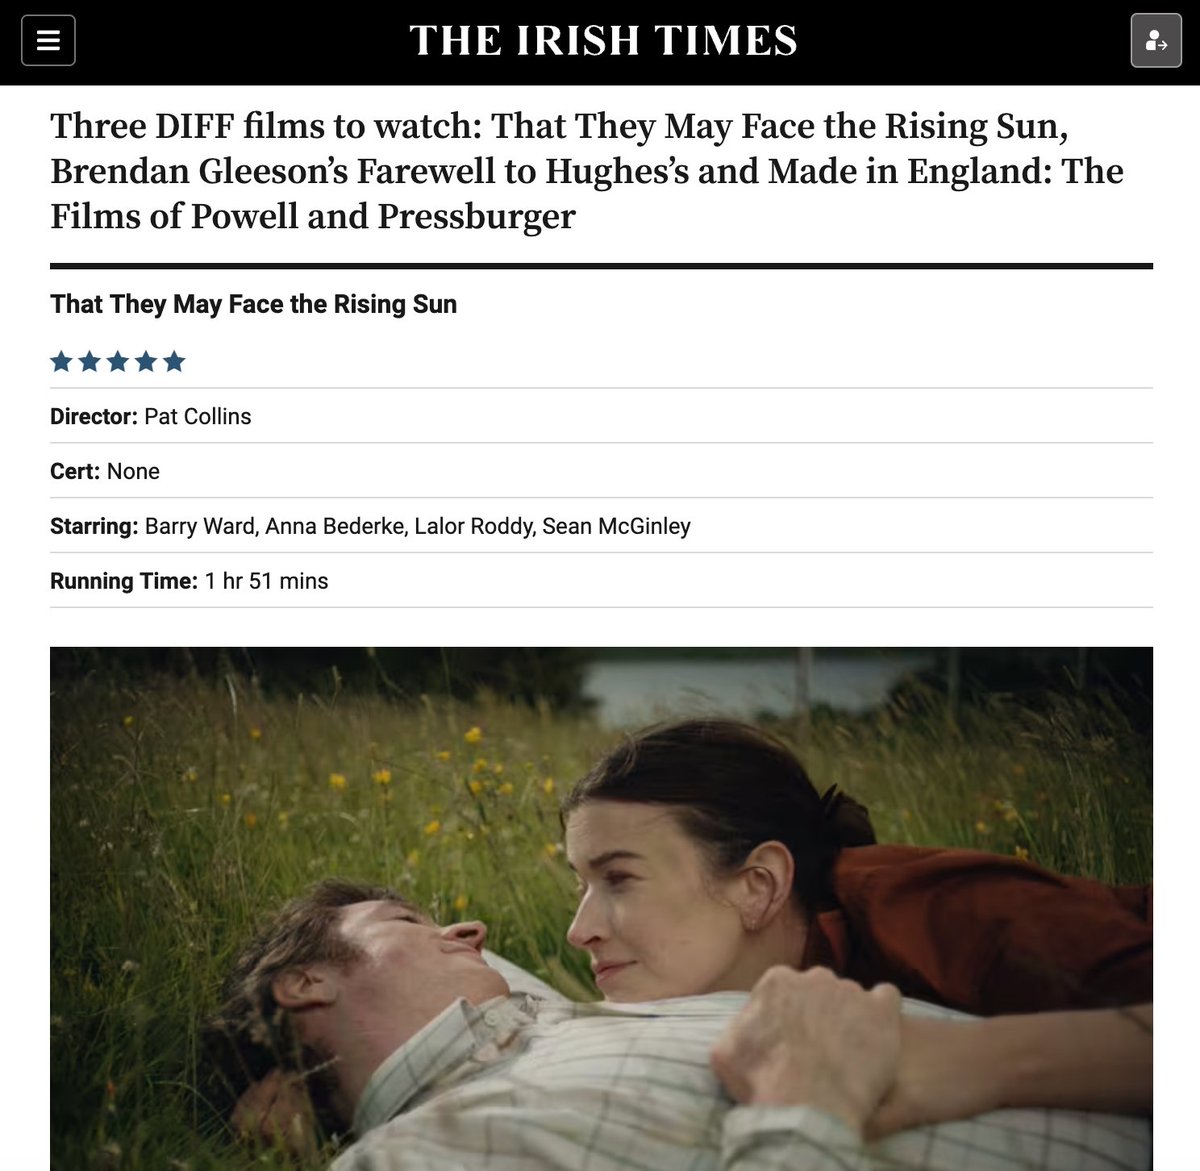 “Pat Collins's That They May Face The Rising Sun is a perfectly pitched adaptation of John McGahern’s final novel” ⭐️⭐️⭐️⭐️⭐️ Thrilled to receive such a glowing review from @DonaldClarke63 in the @IrishTimes! 📰 Full review: bit.ly/3P6wOa7 In cinemas 25 April 📅